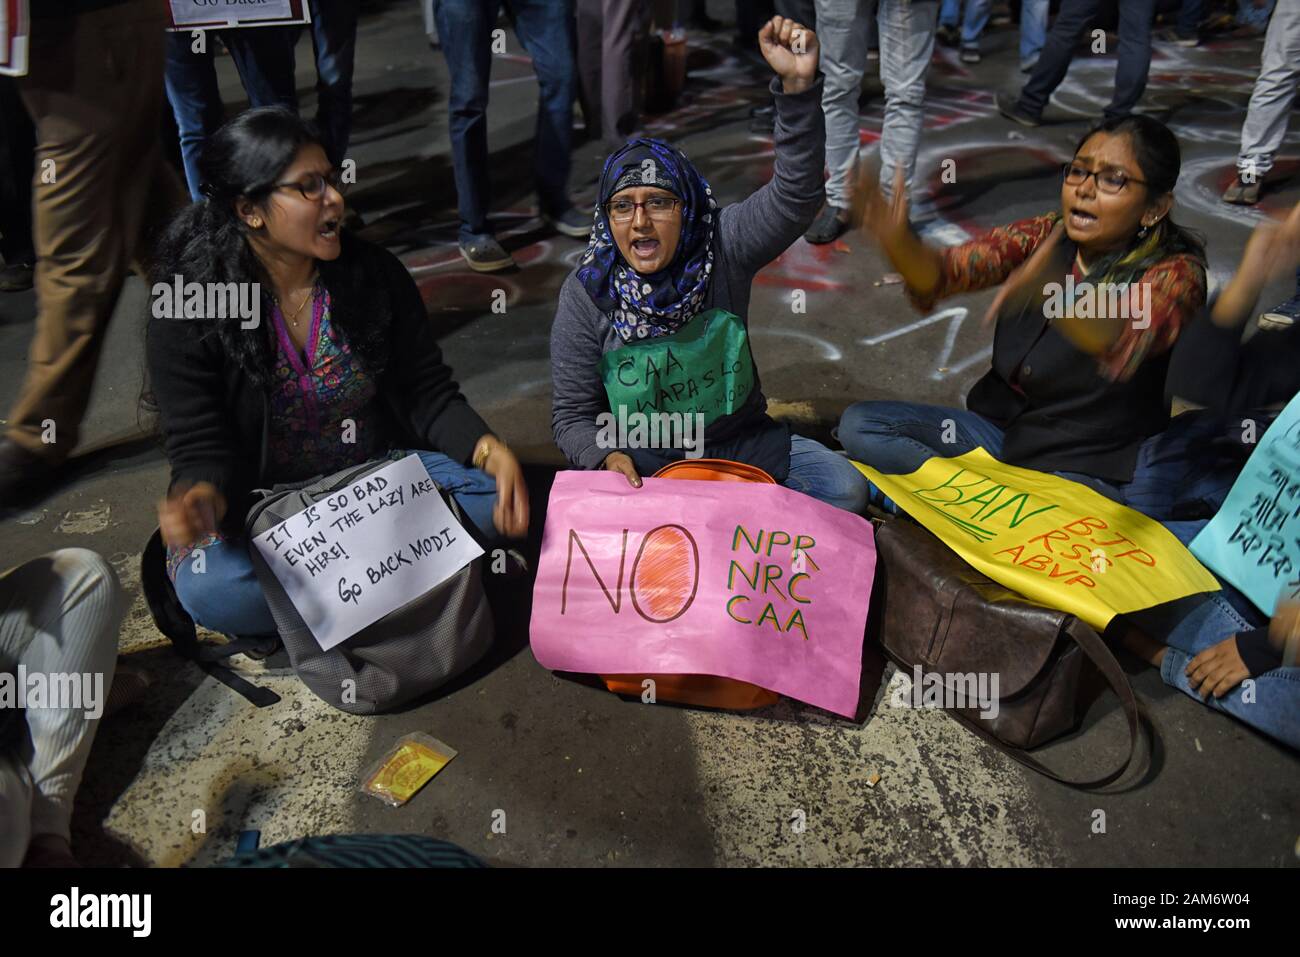 Kolkata, India. 11th Jan, 2019. Protesters hold placards while chanting slogans during the demonstration.Demonstration against the visit of India's Prime Minister Narendra Modi and also against (Citizenship Amendment Bill) or CAB which grants Indian citizenship to non-Muslims of Afghanistan, Pakistan and Bangladesh that was passed by the Indian Government in December 2019 and has created violence, strike and protest all over the India. Credit: Avishek Das/SOPA Images/ZUMA Wire/Alamy Live News Stock Photo